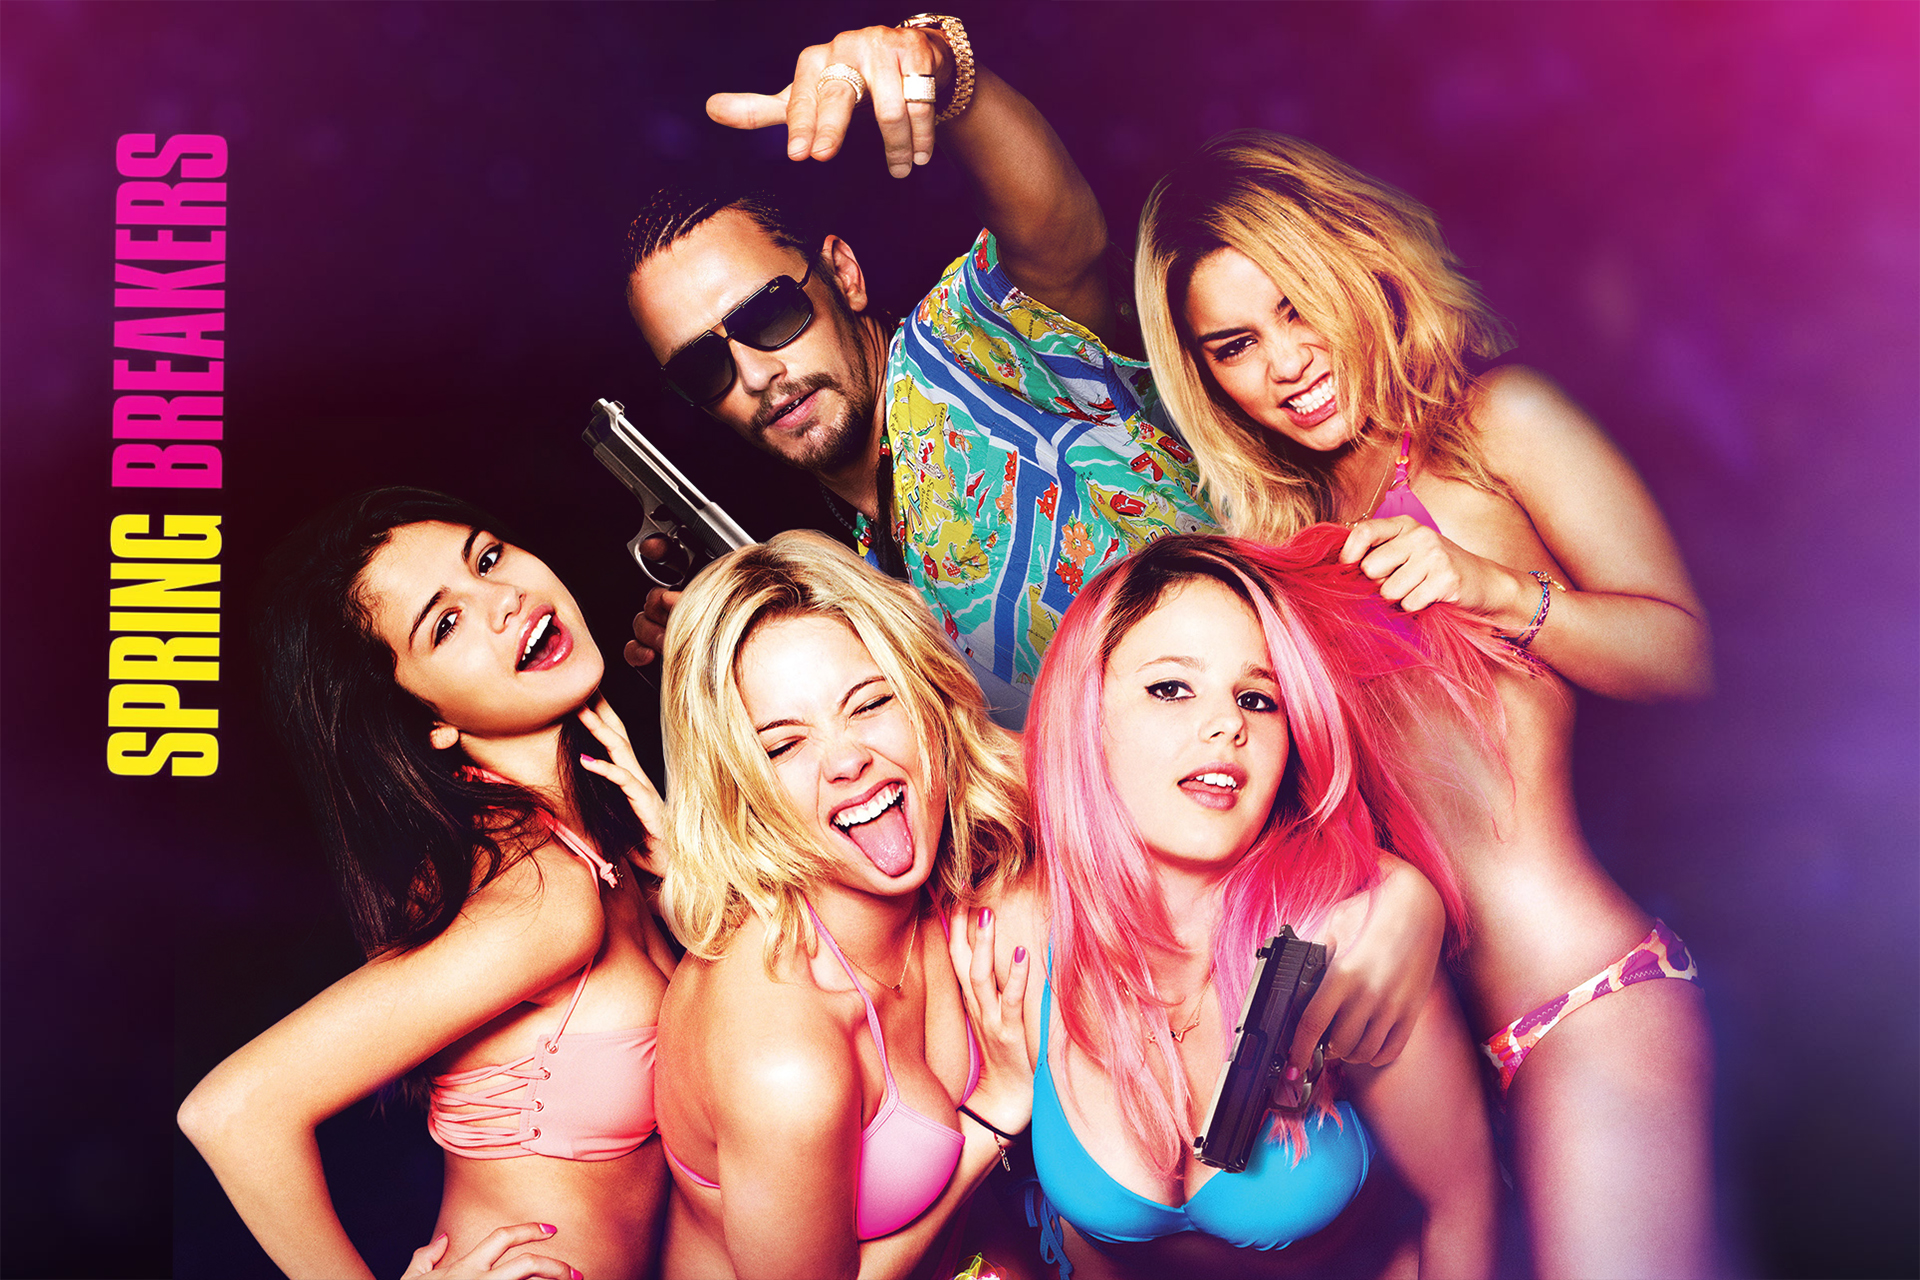 daniel bouder recommends watch spring breakers free pic